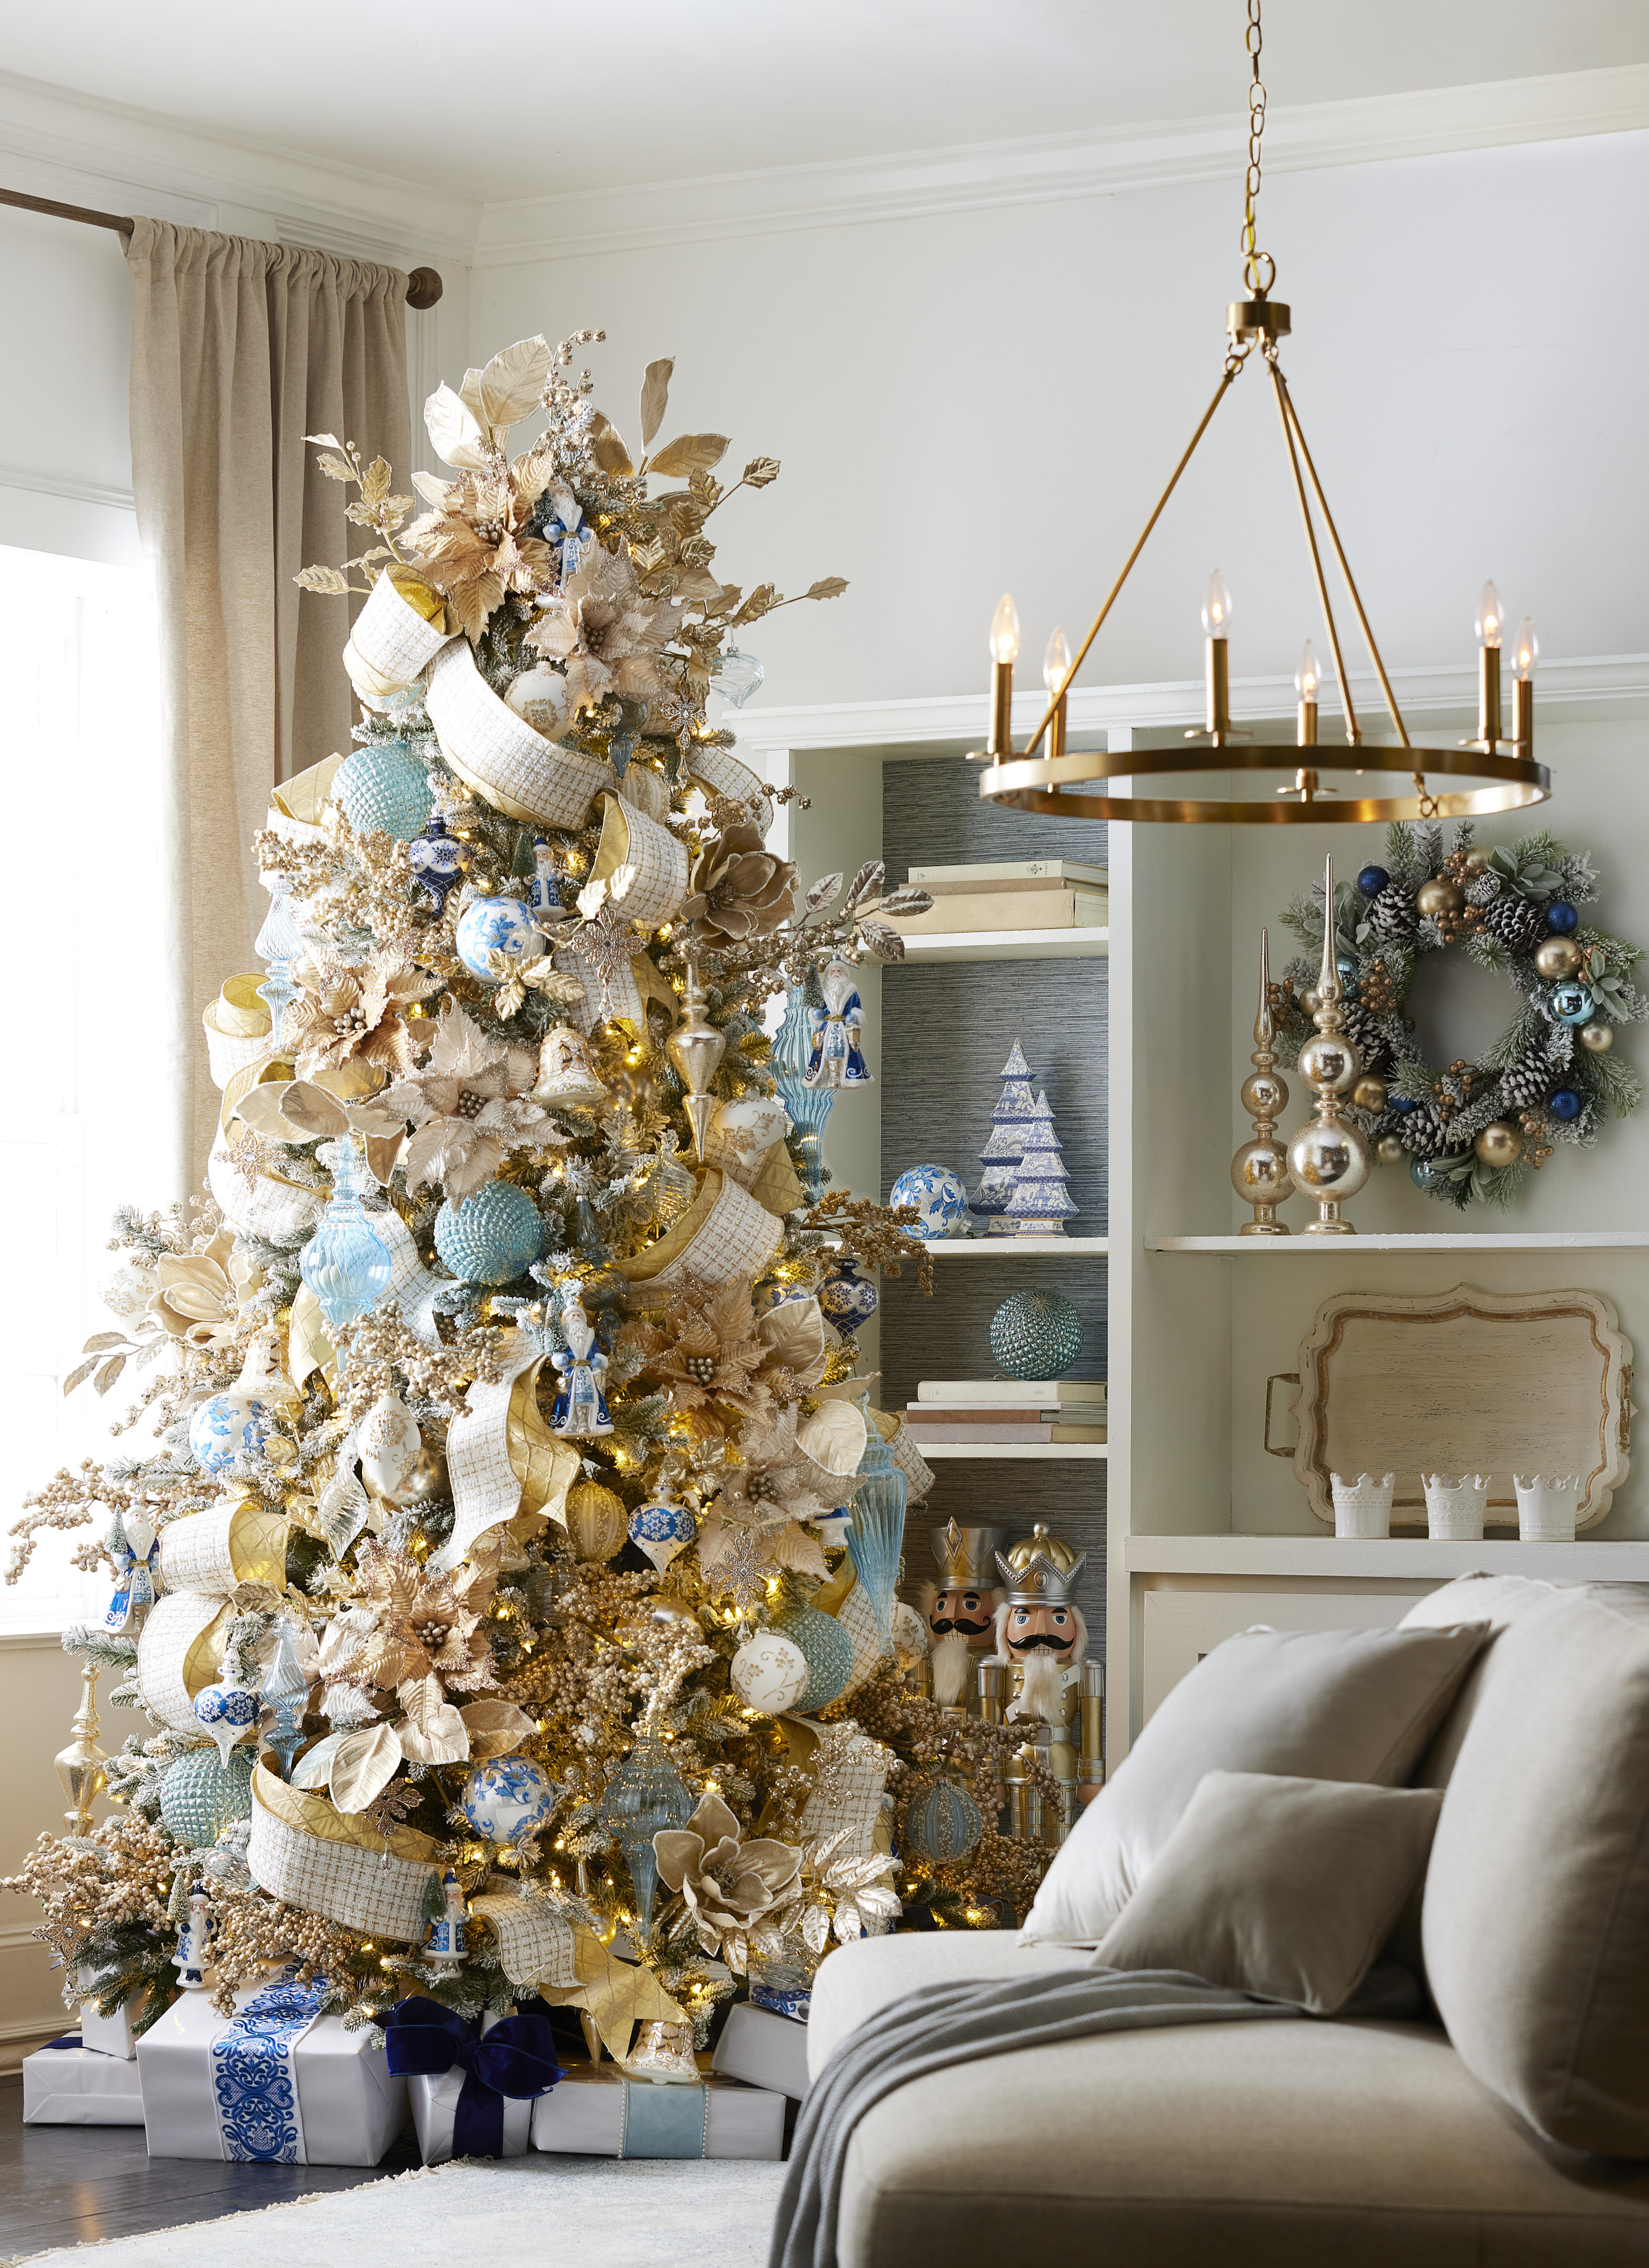 How To Make A White Christmas Tree The Centerpiece Of Your Holiday Decor